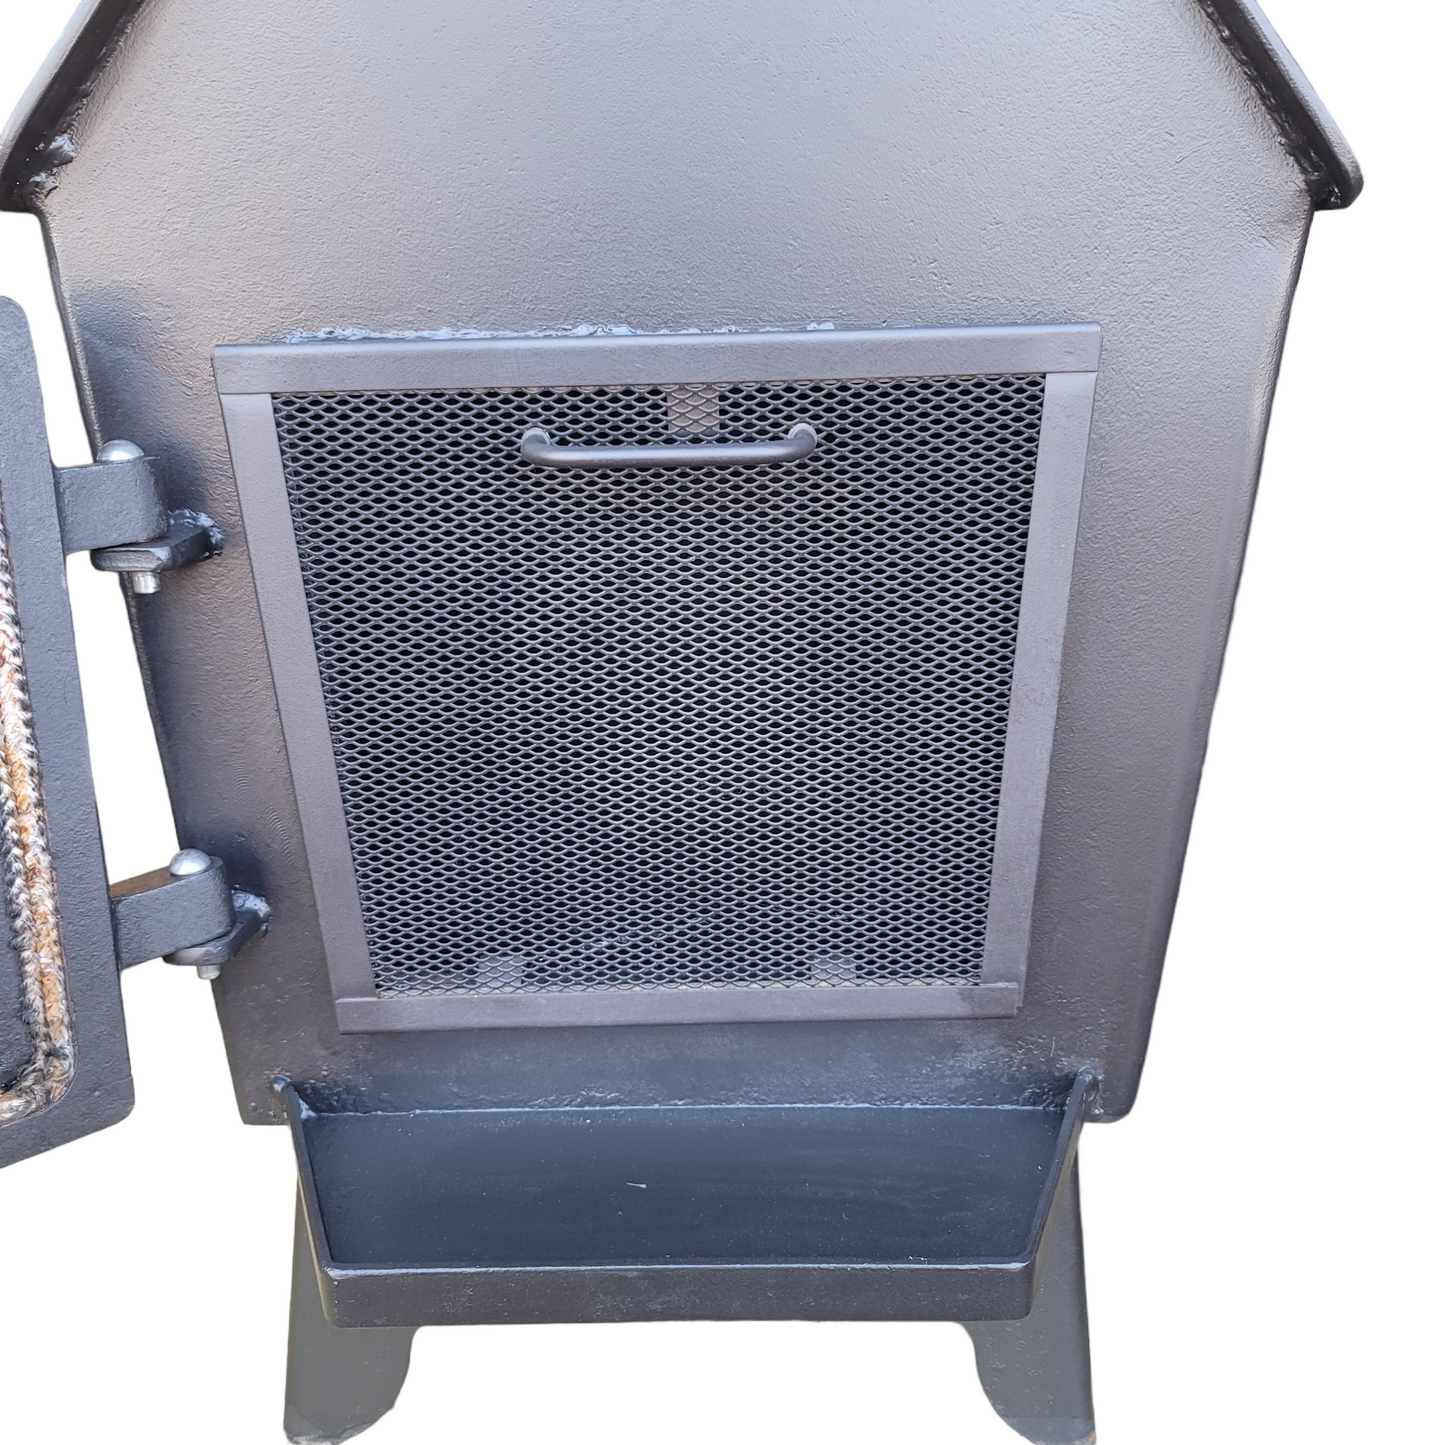 Woodcraft Wood Stove Fire Spark Arresting Screen